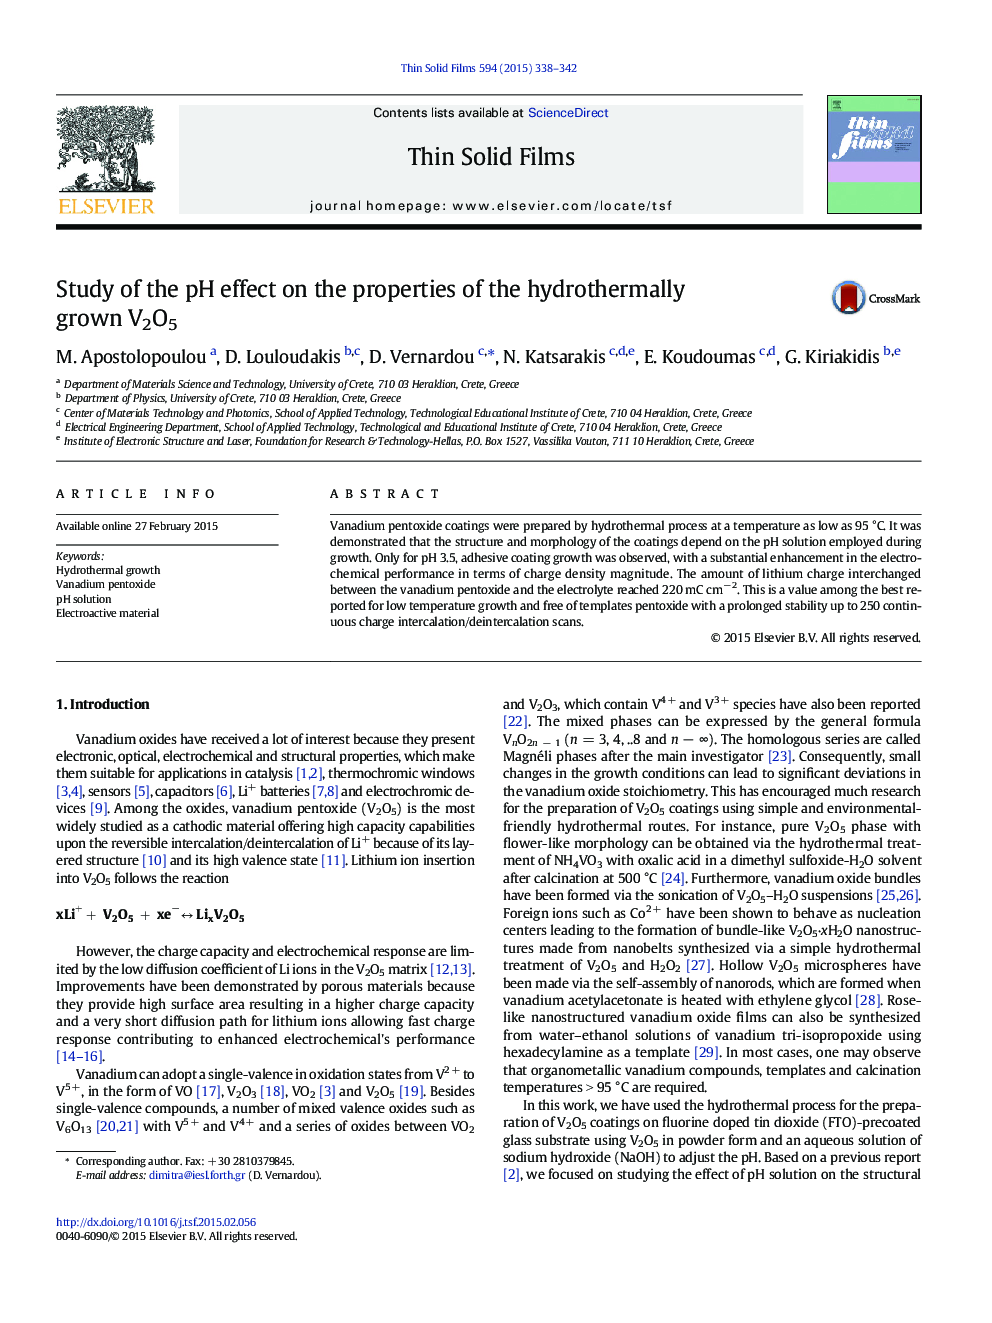 Study of the pH effect on the properties of the hydrothermally grown V2O5